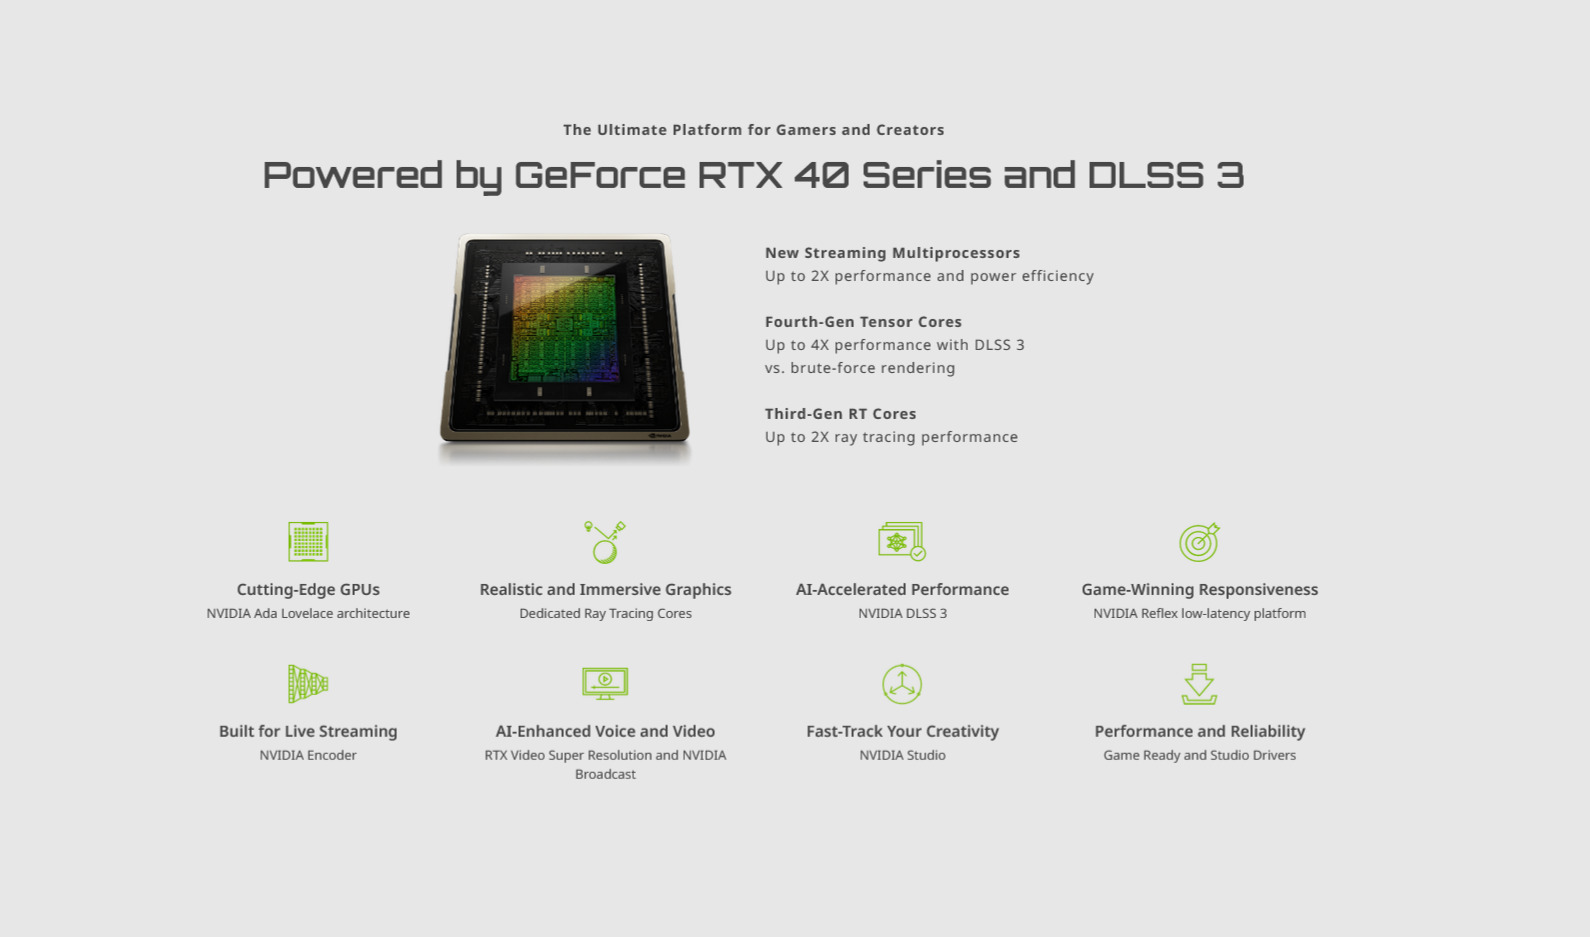 A large marketing image providing additional information about the product Gigabyte GeForce RTX 4060 Ti Eagle OC Ice 8GB GDDR6 - Additional alt info not provided